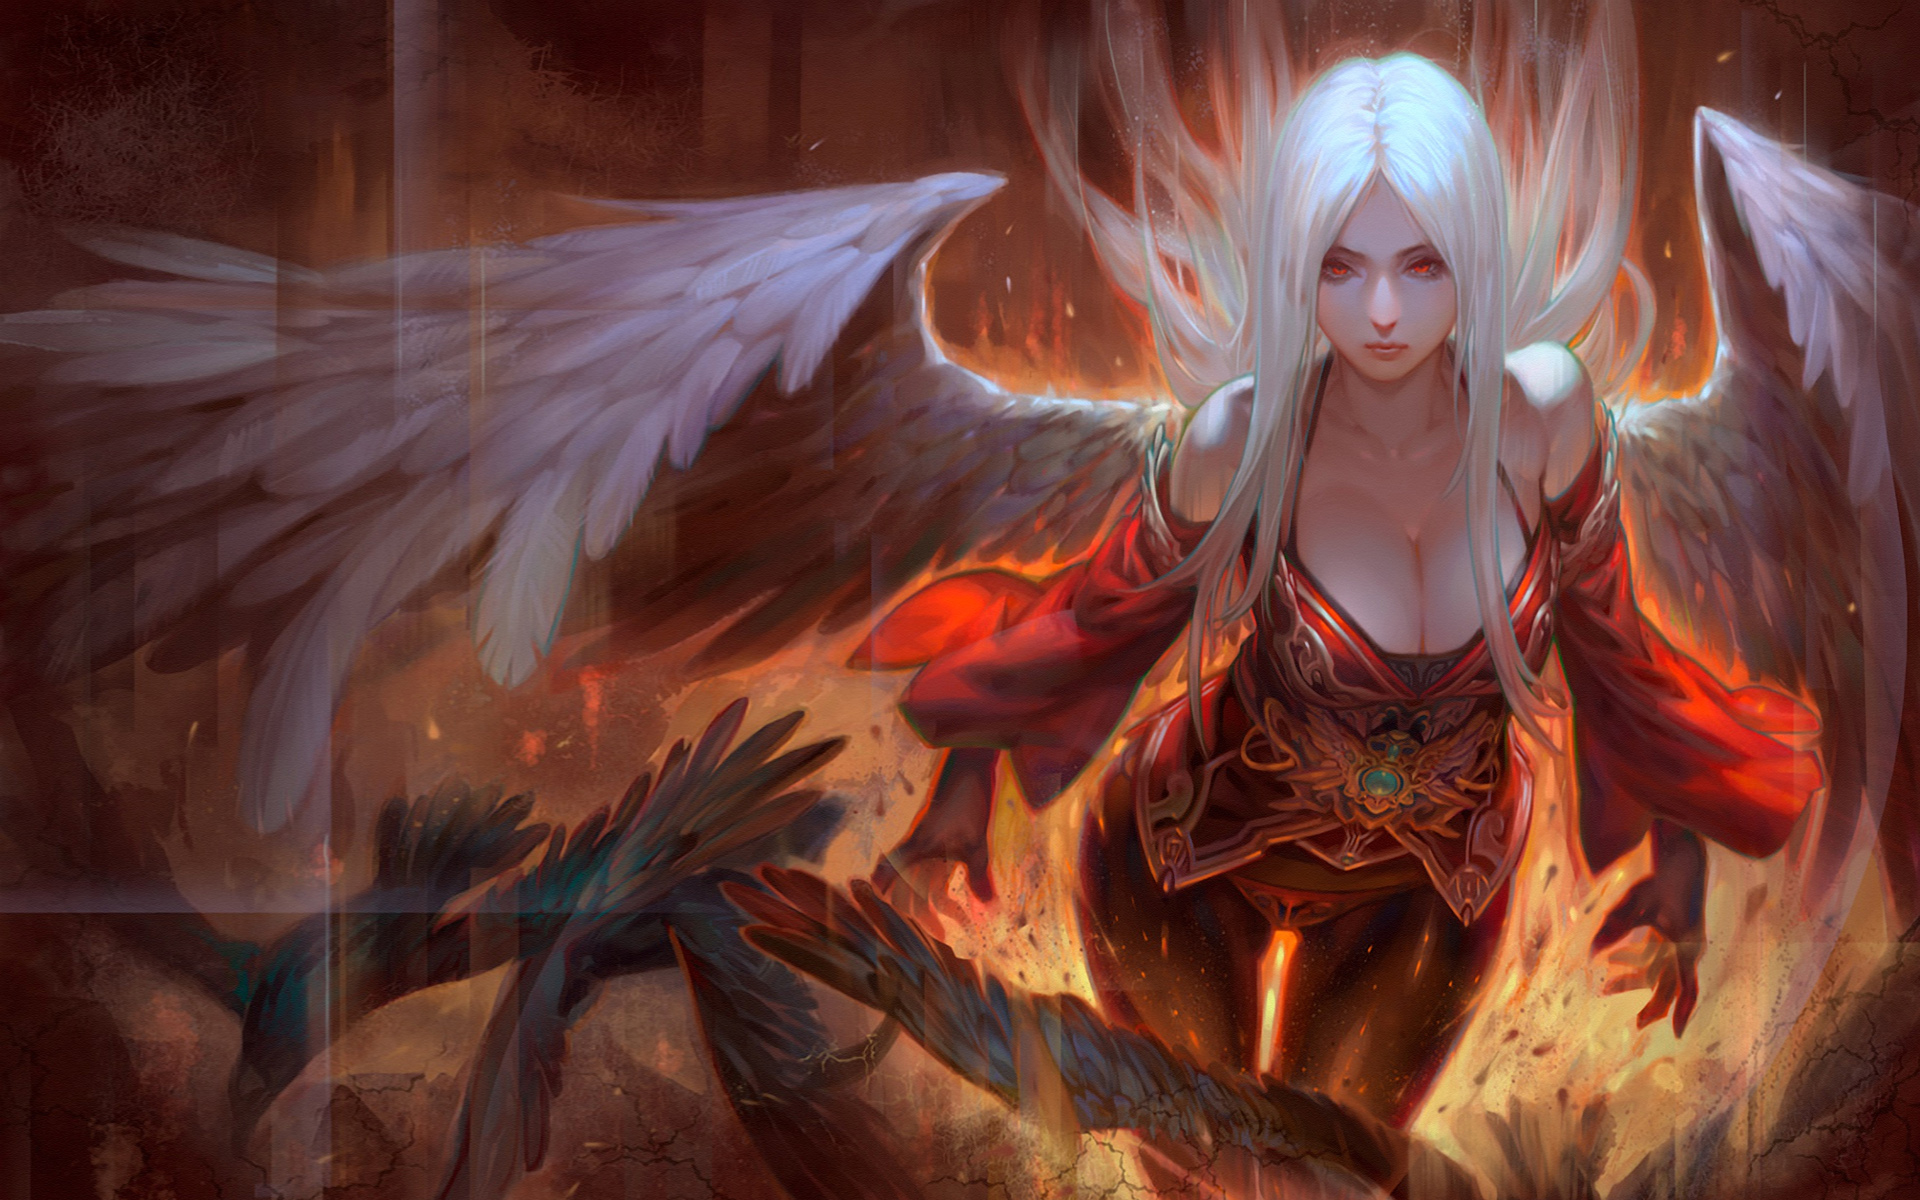 Girl Angel-White-hair-angel wings-and-red eyes-fire-Art Wallpaper  HD-1920x1080 : 